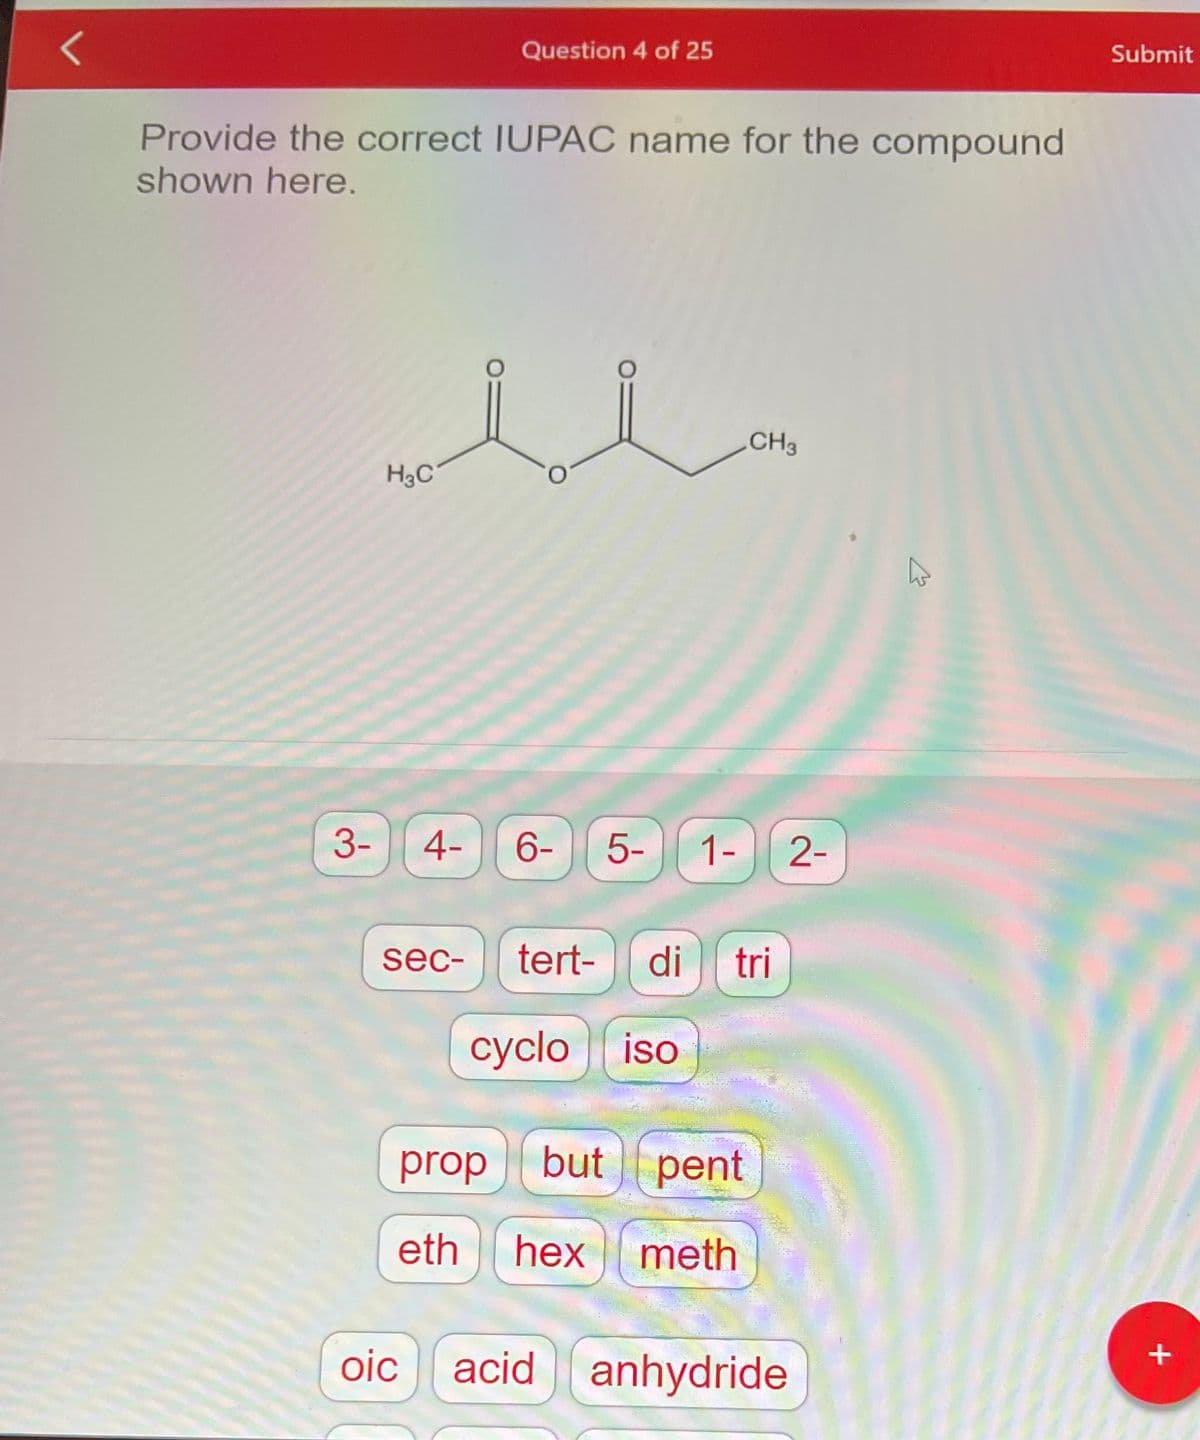 Provide the correct IUPAC name for the compound
shown here.
H3C
Question 4 of 25
ملل
3- 4- 6-
sec-
5-
cyclo iso
tert- di tri
prop but
eth hex
1-
20-
CH3
pent
meth
2-
oic acid anhydride
K
Submit
+